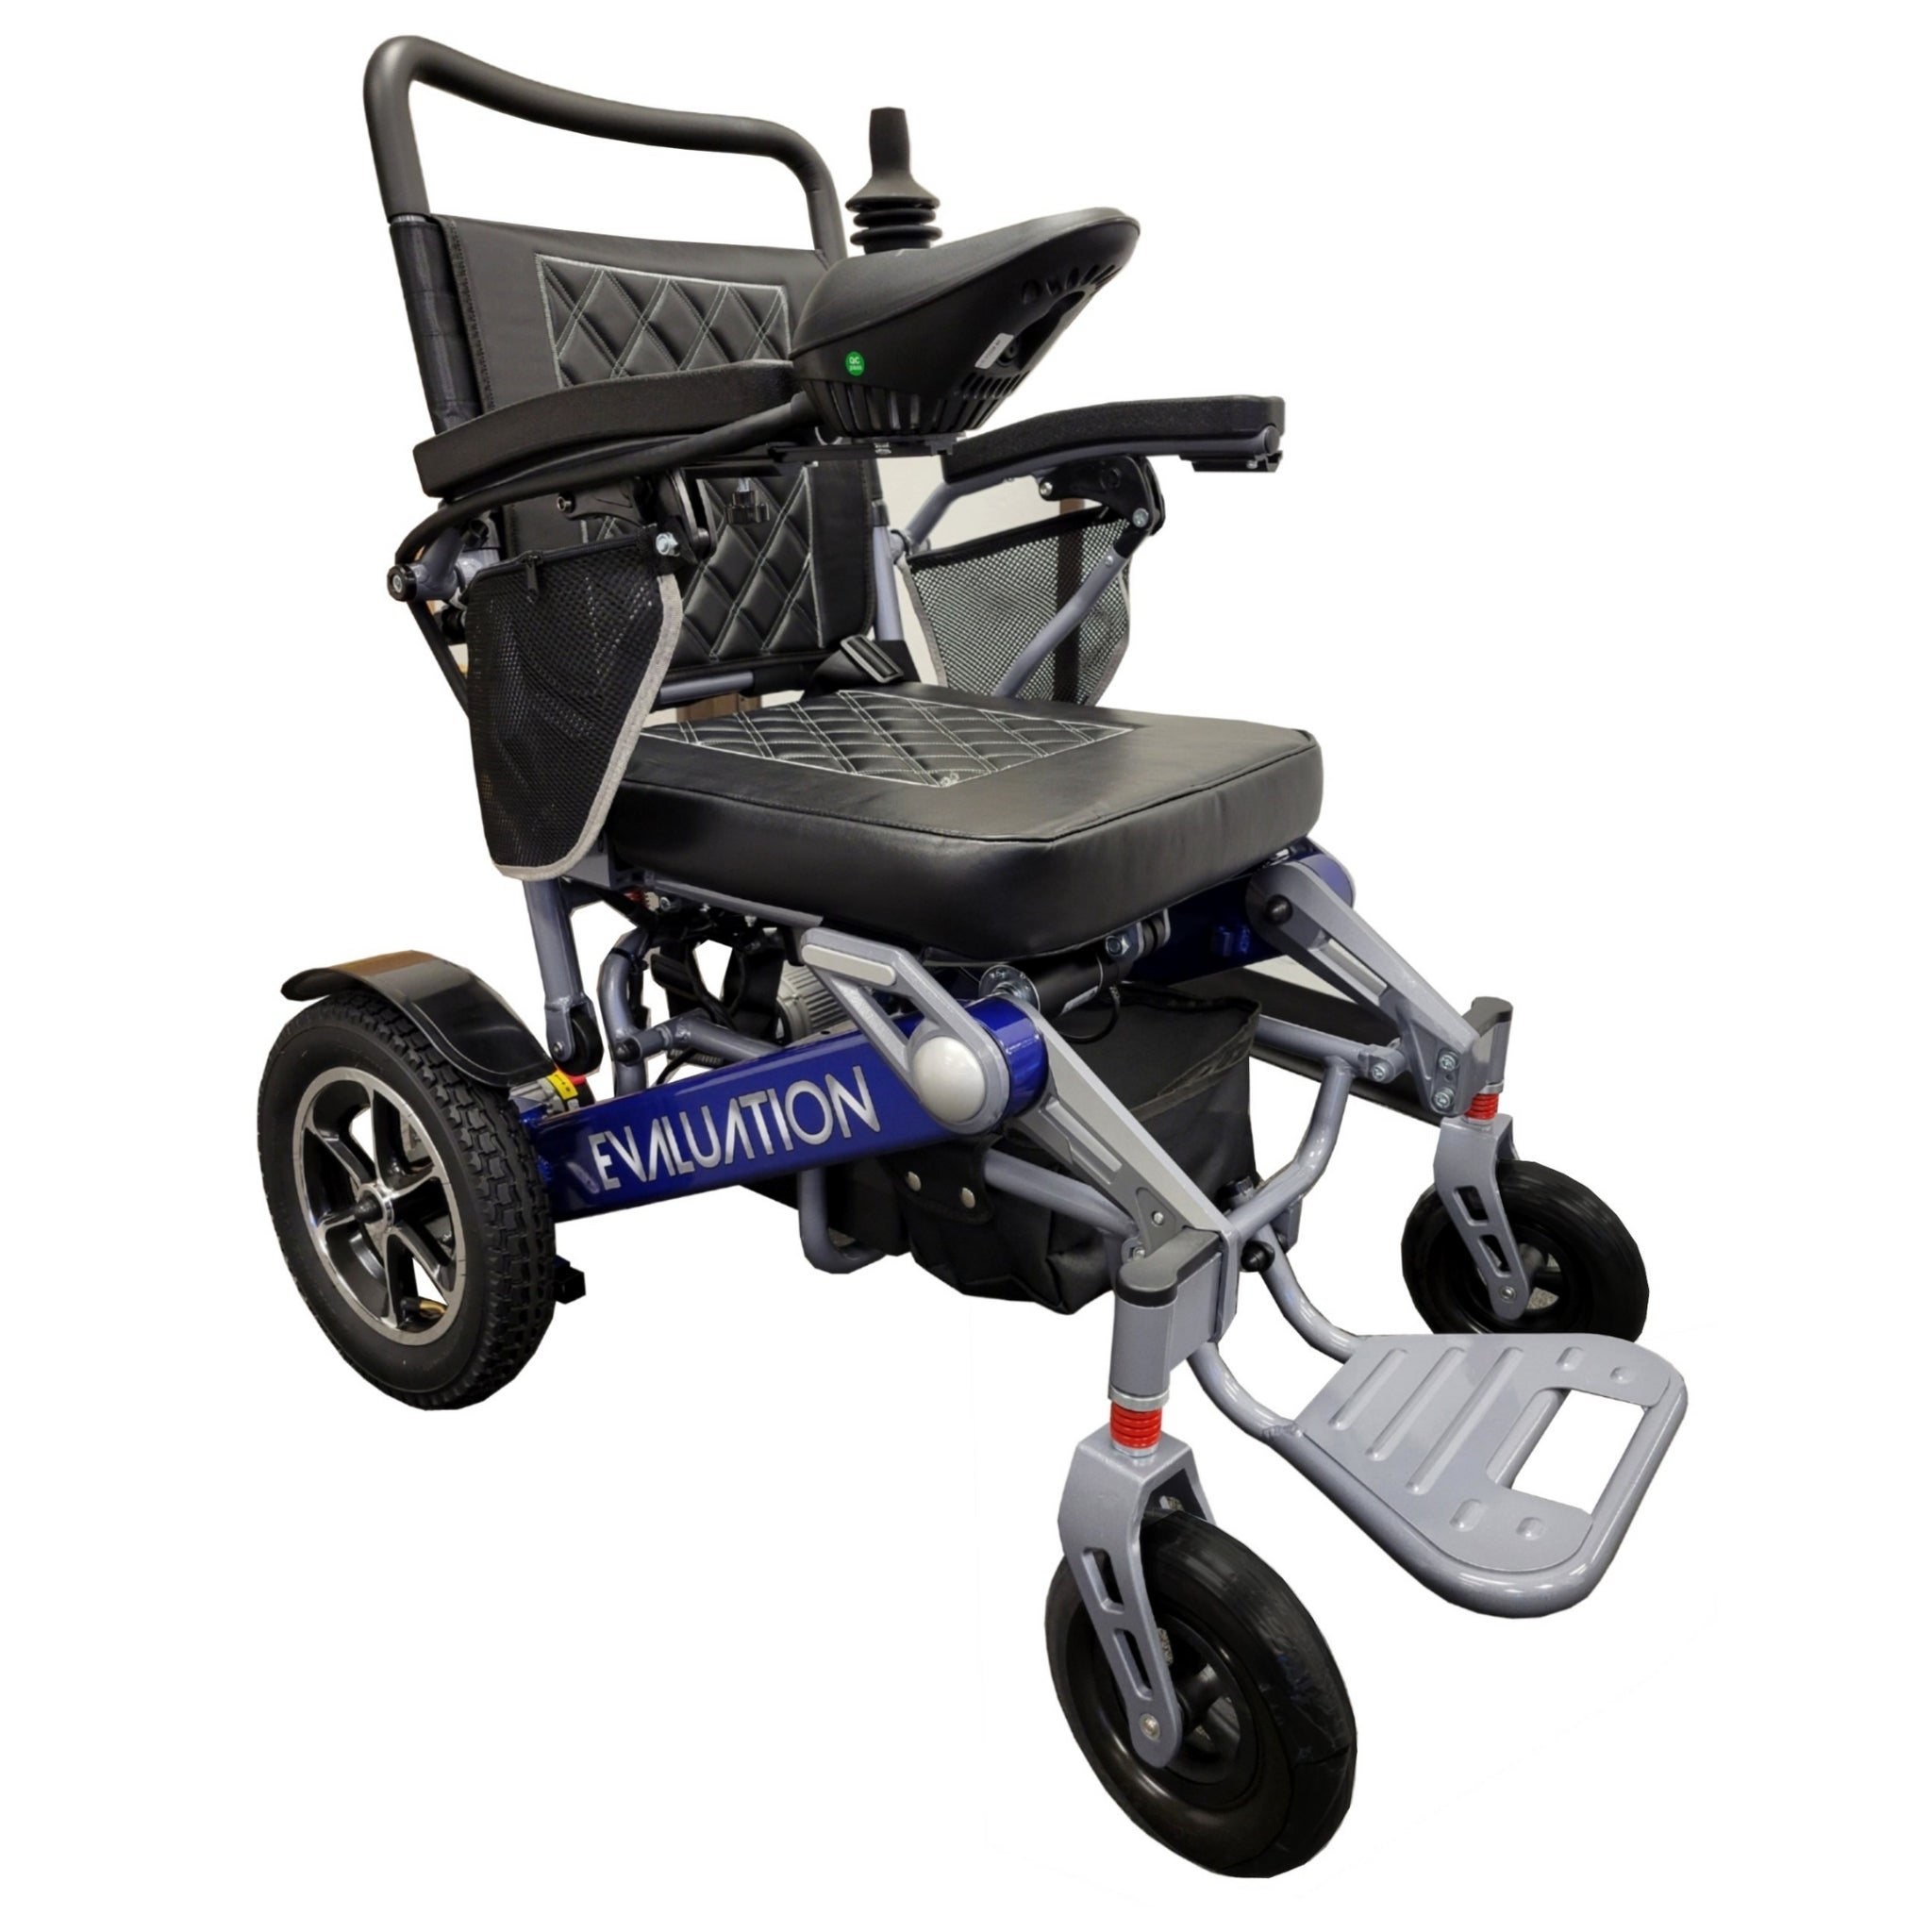 Evaluation_Power_Wheelchair_Specifications